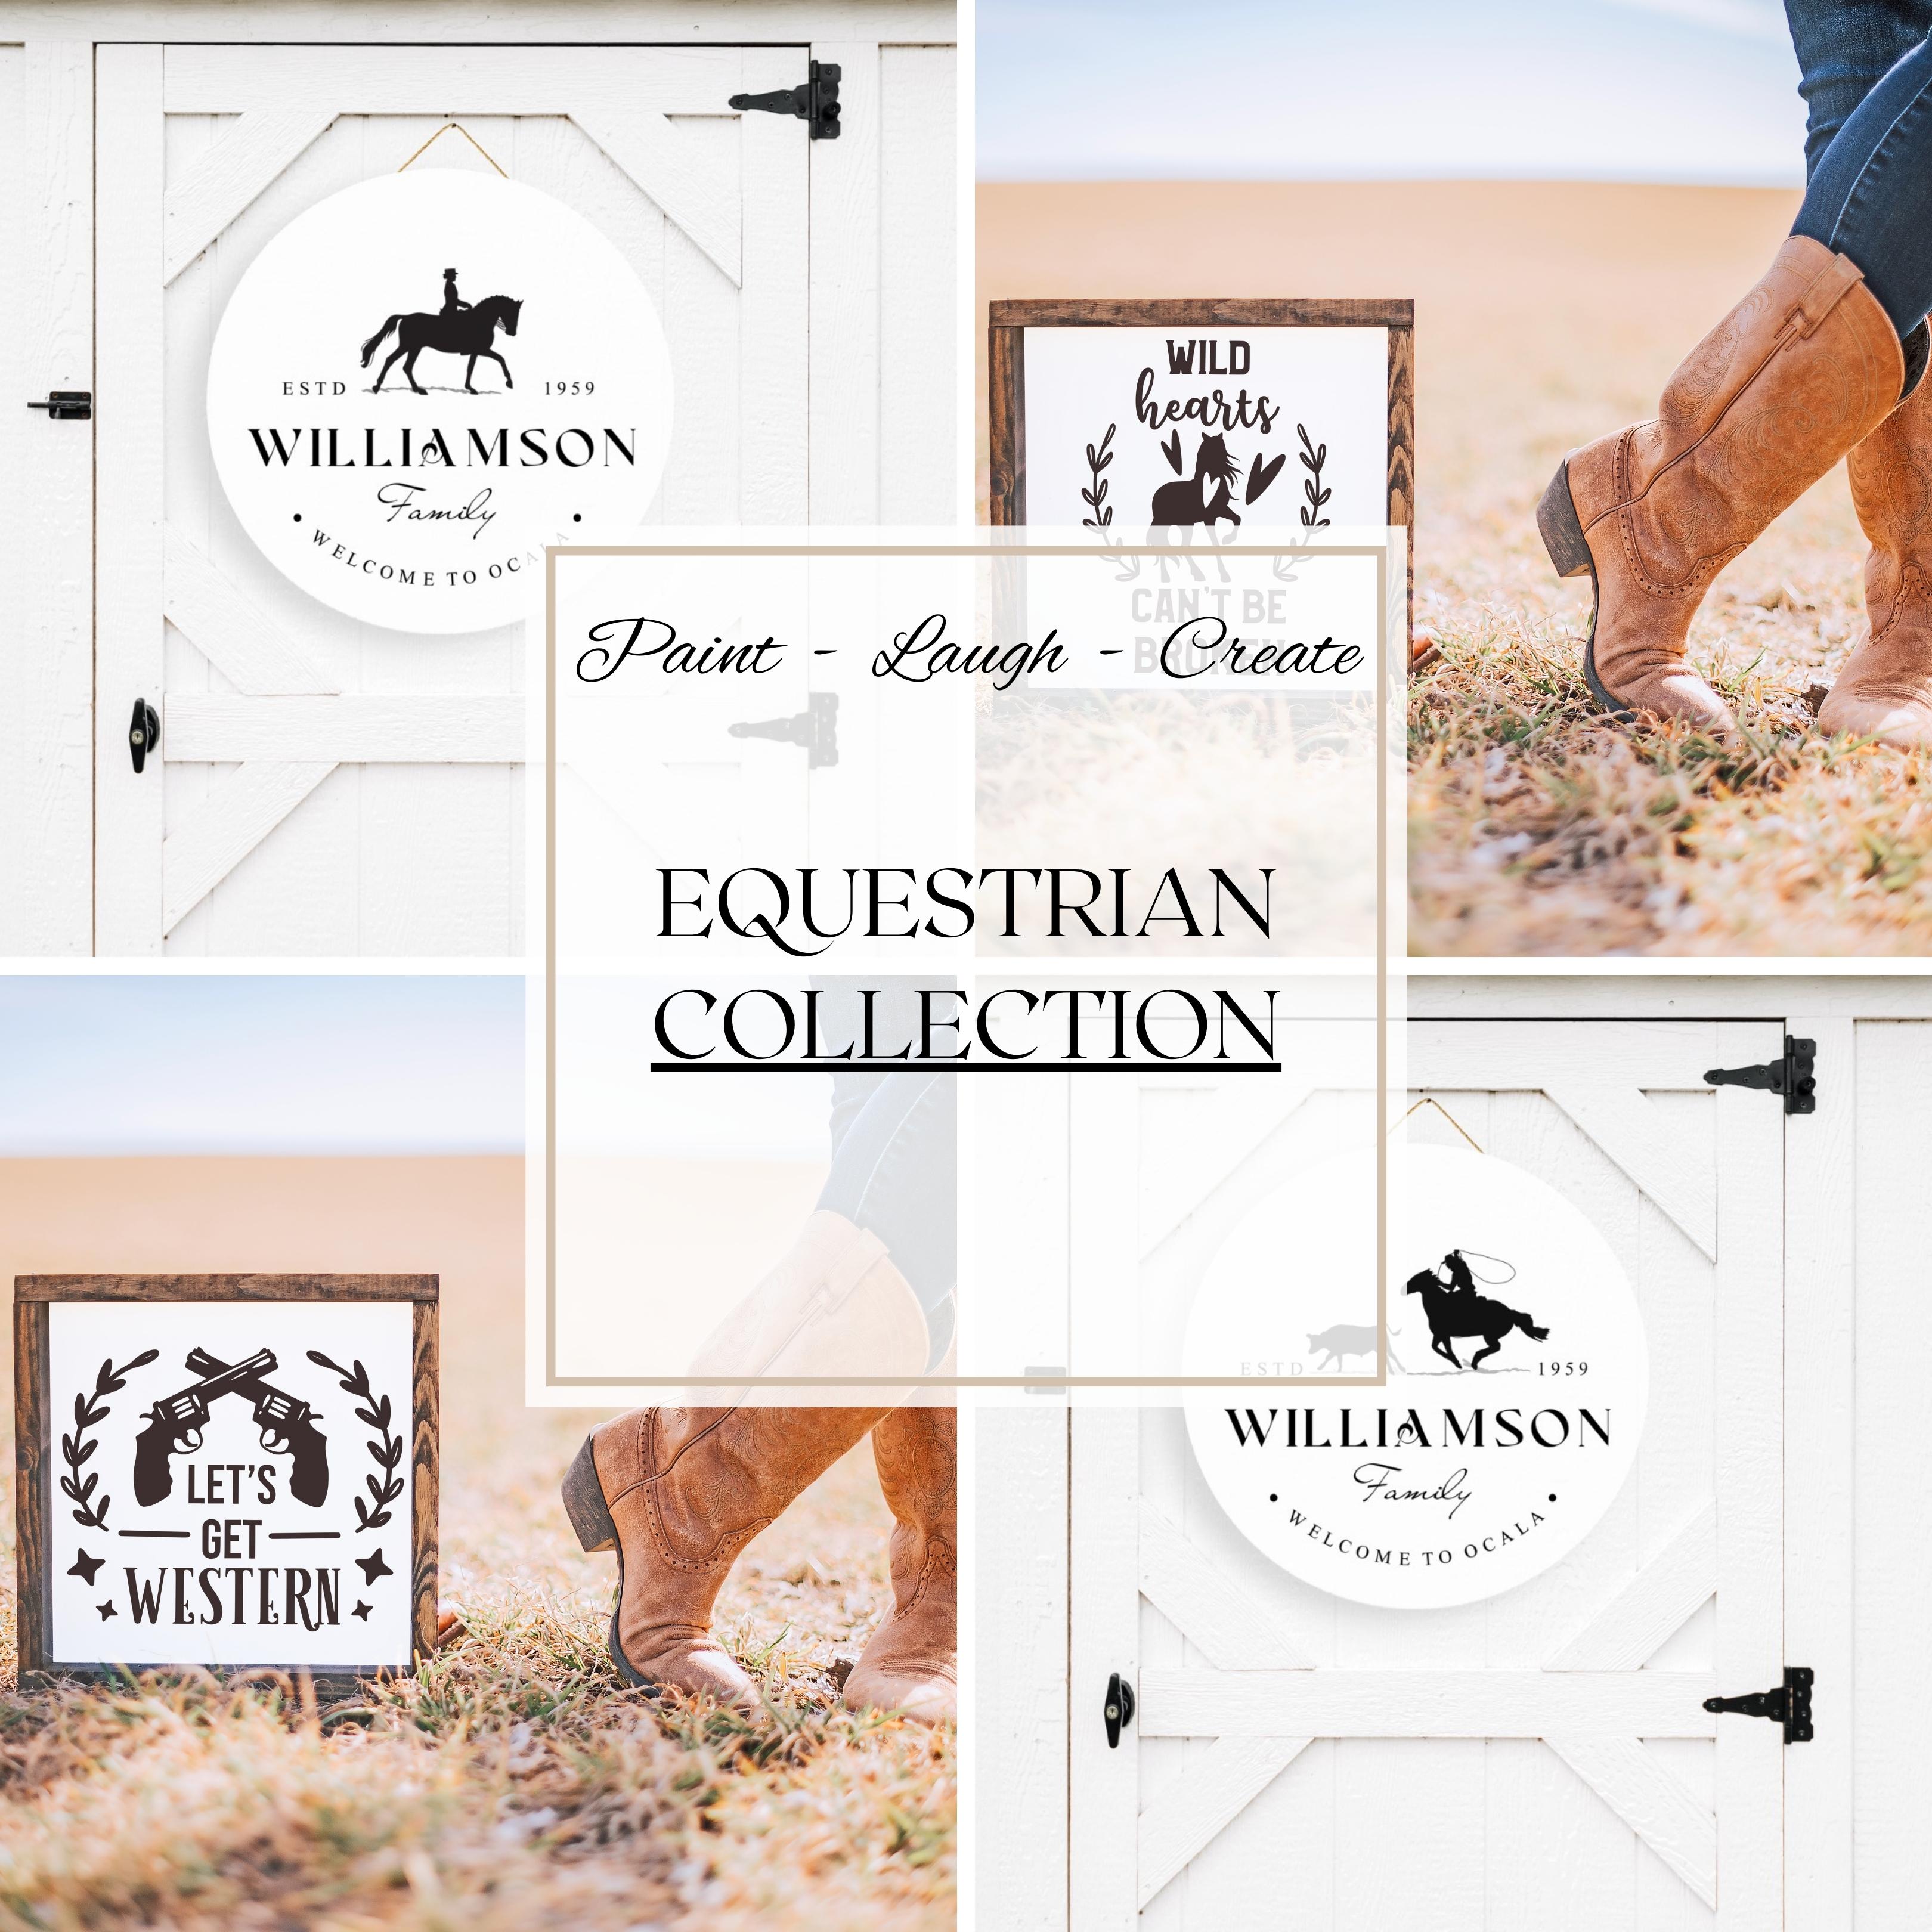 THE EQUESTRIAN COLLECTION